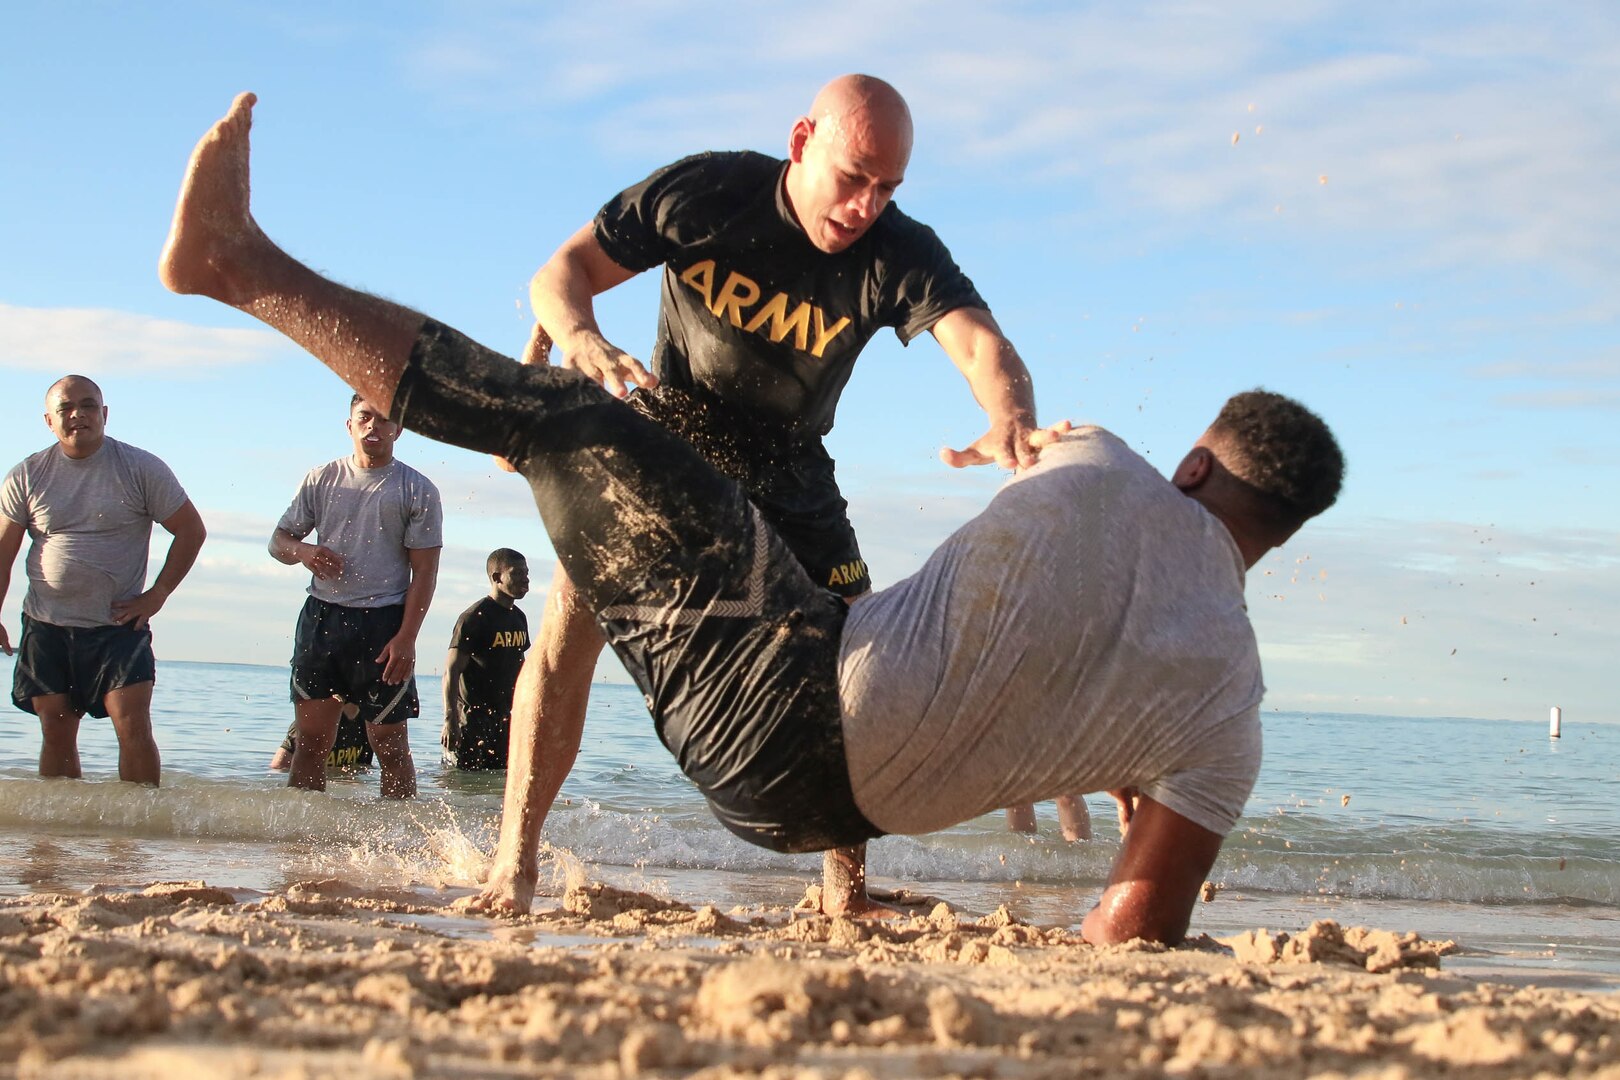 A U.S. Army Soldier takes down an U.S. Air Force Airman during a U.S. Army Combatives course at Joint Base Pearl Harbor-Hickam, Hawaii.